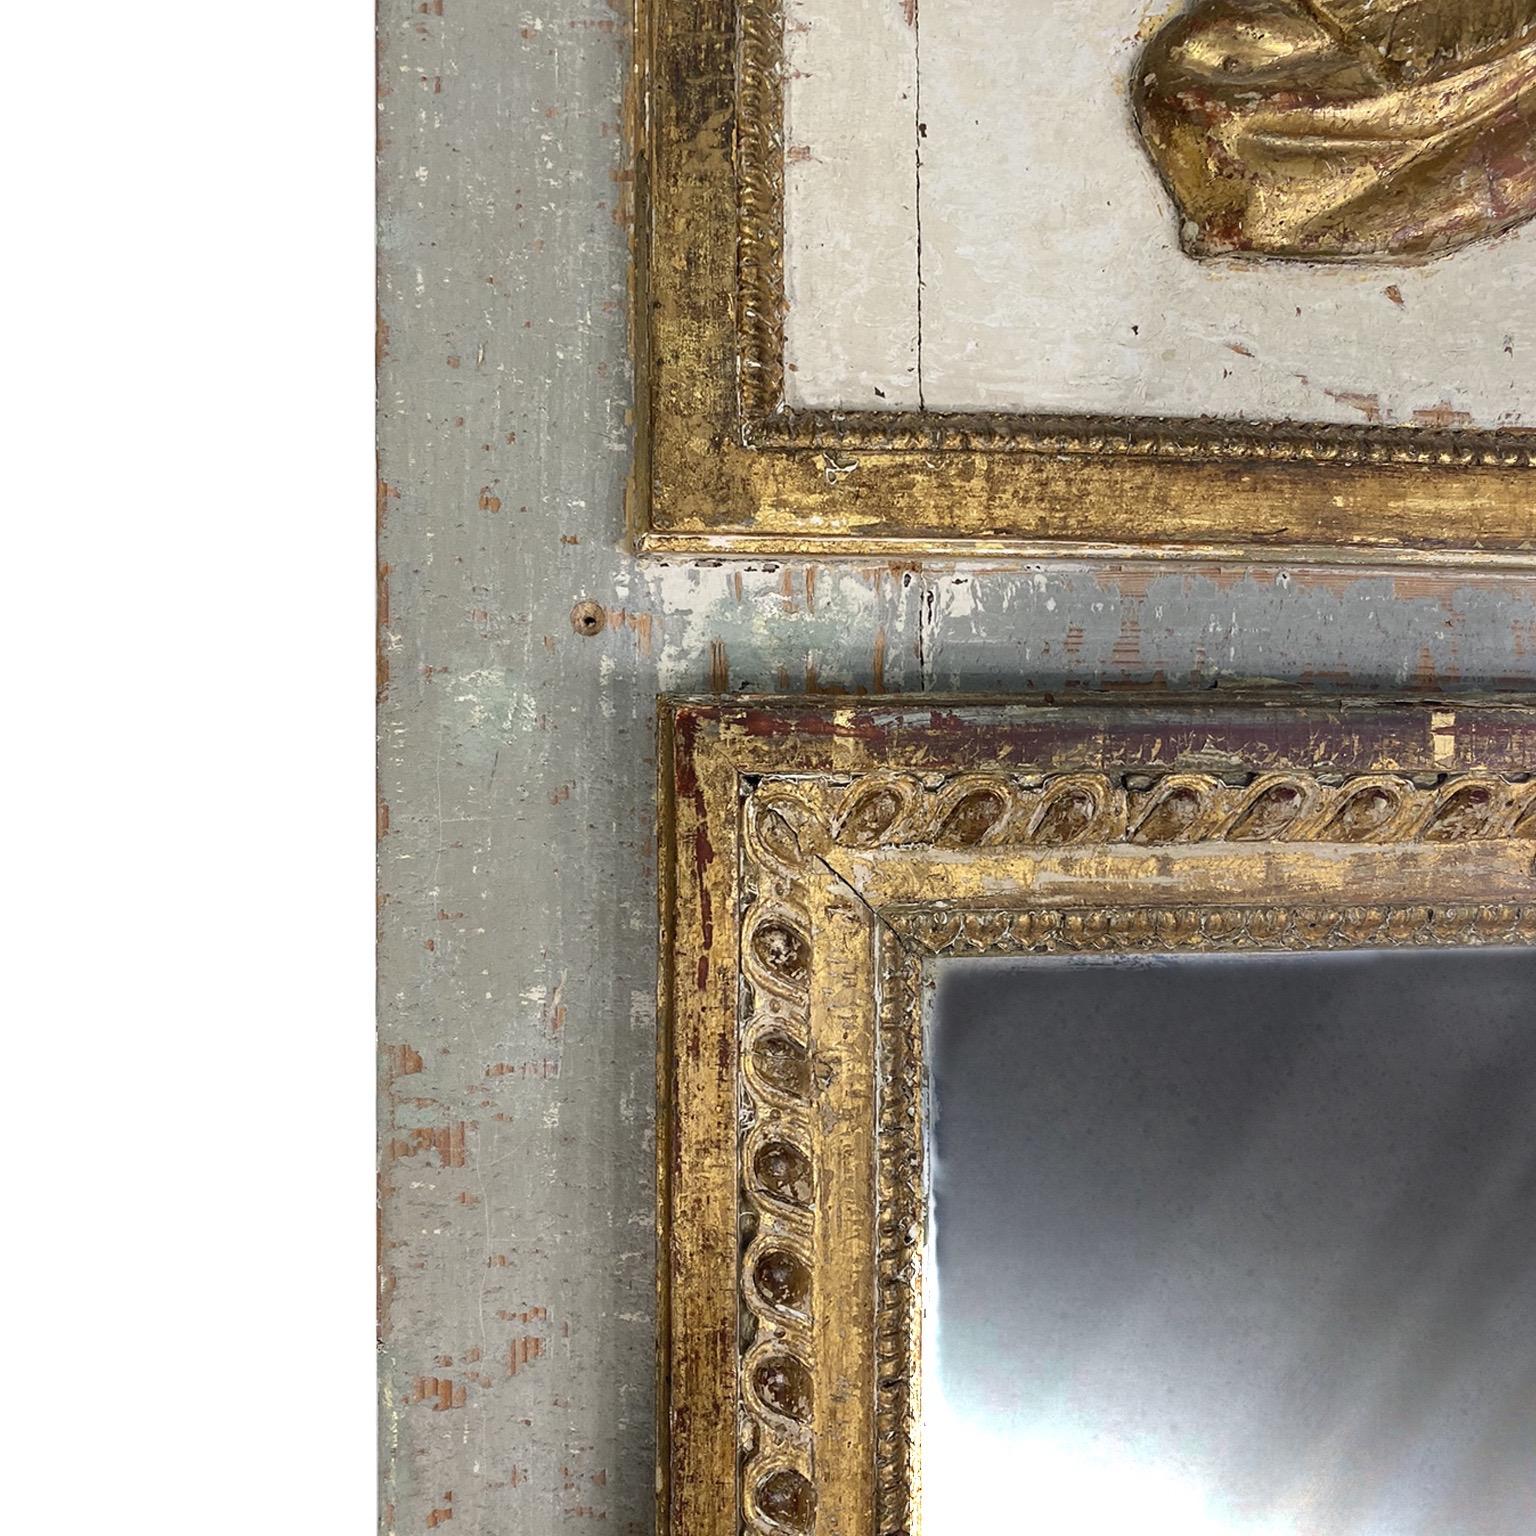 Beautiful 18th century French Louis XVI painted and gilded wooden trumeau mirror with face of Roman soldier. This mirror is all original paint and gilt. It could be a wall mirror or a floor mirror. Lovely patina and crazing on paint.